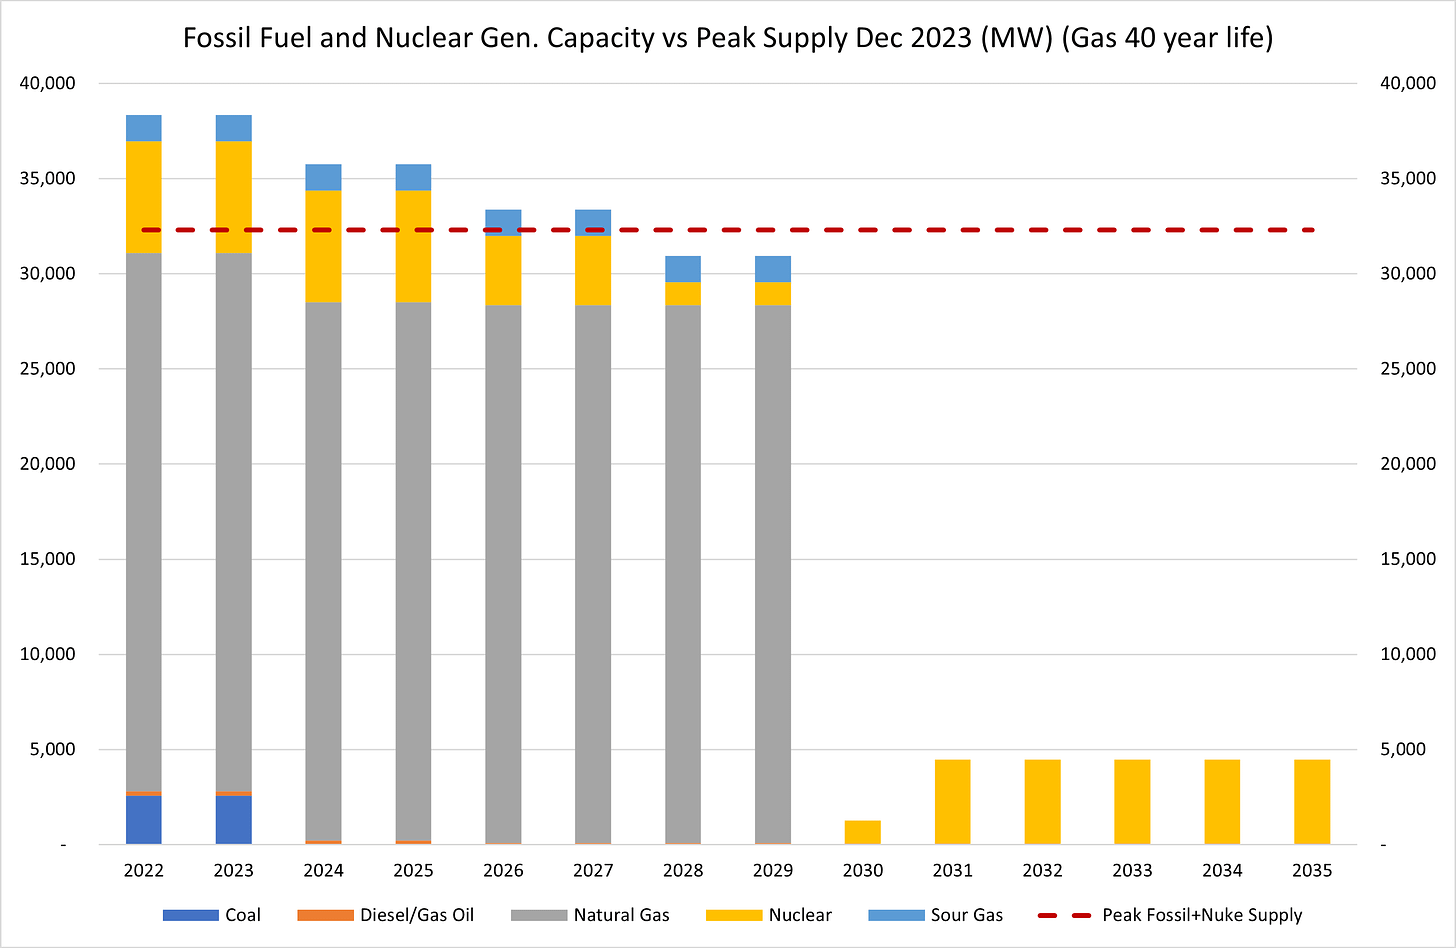 Figure 3 - No Fossil Fuel from 2030 and Nuclear Gen Capacity vs Peak Supply Dec 2023 (MW) (Gas Lifetime 40 years)